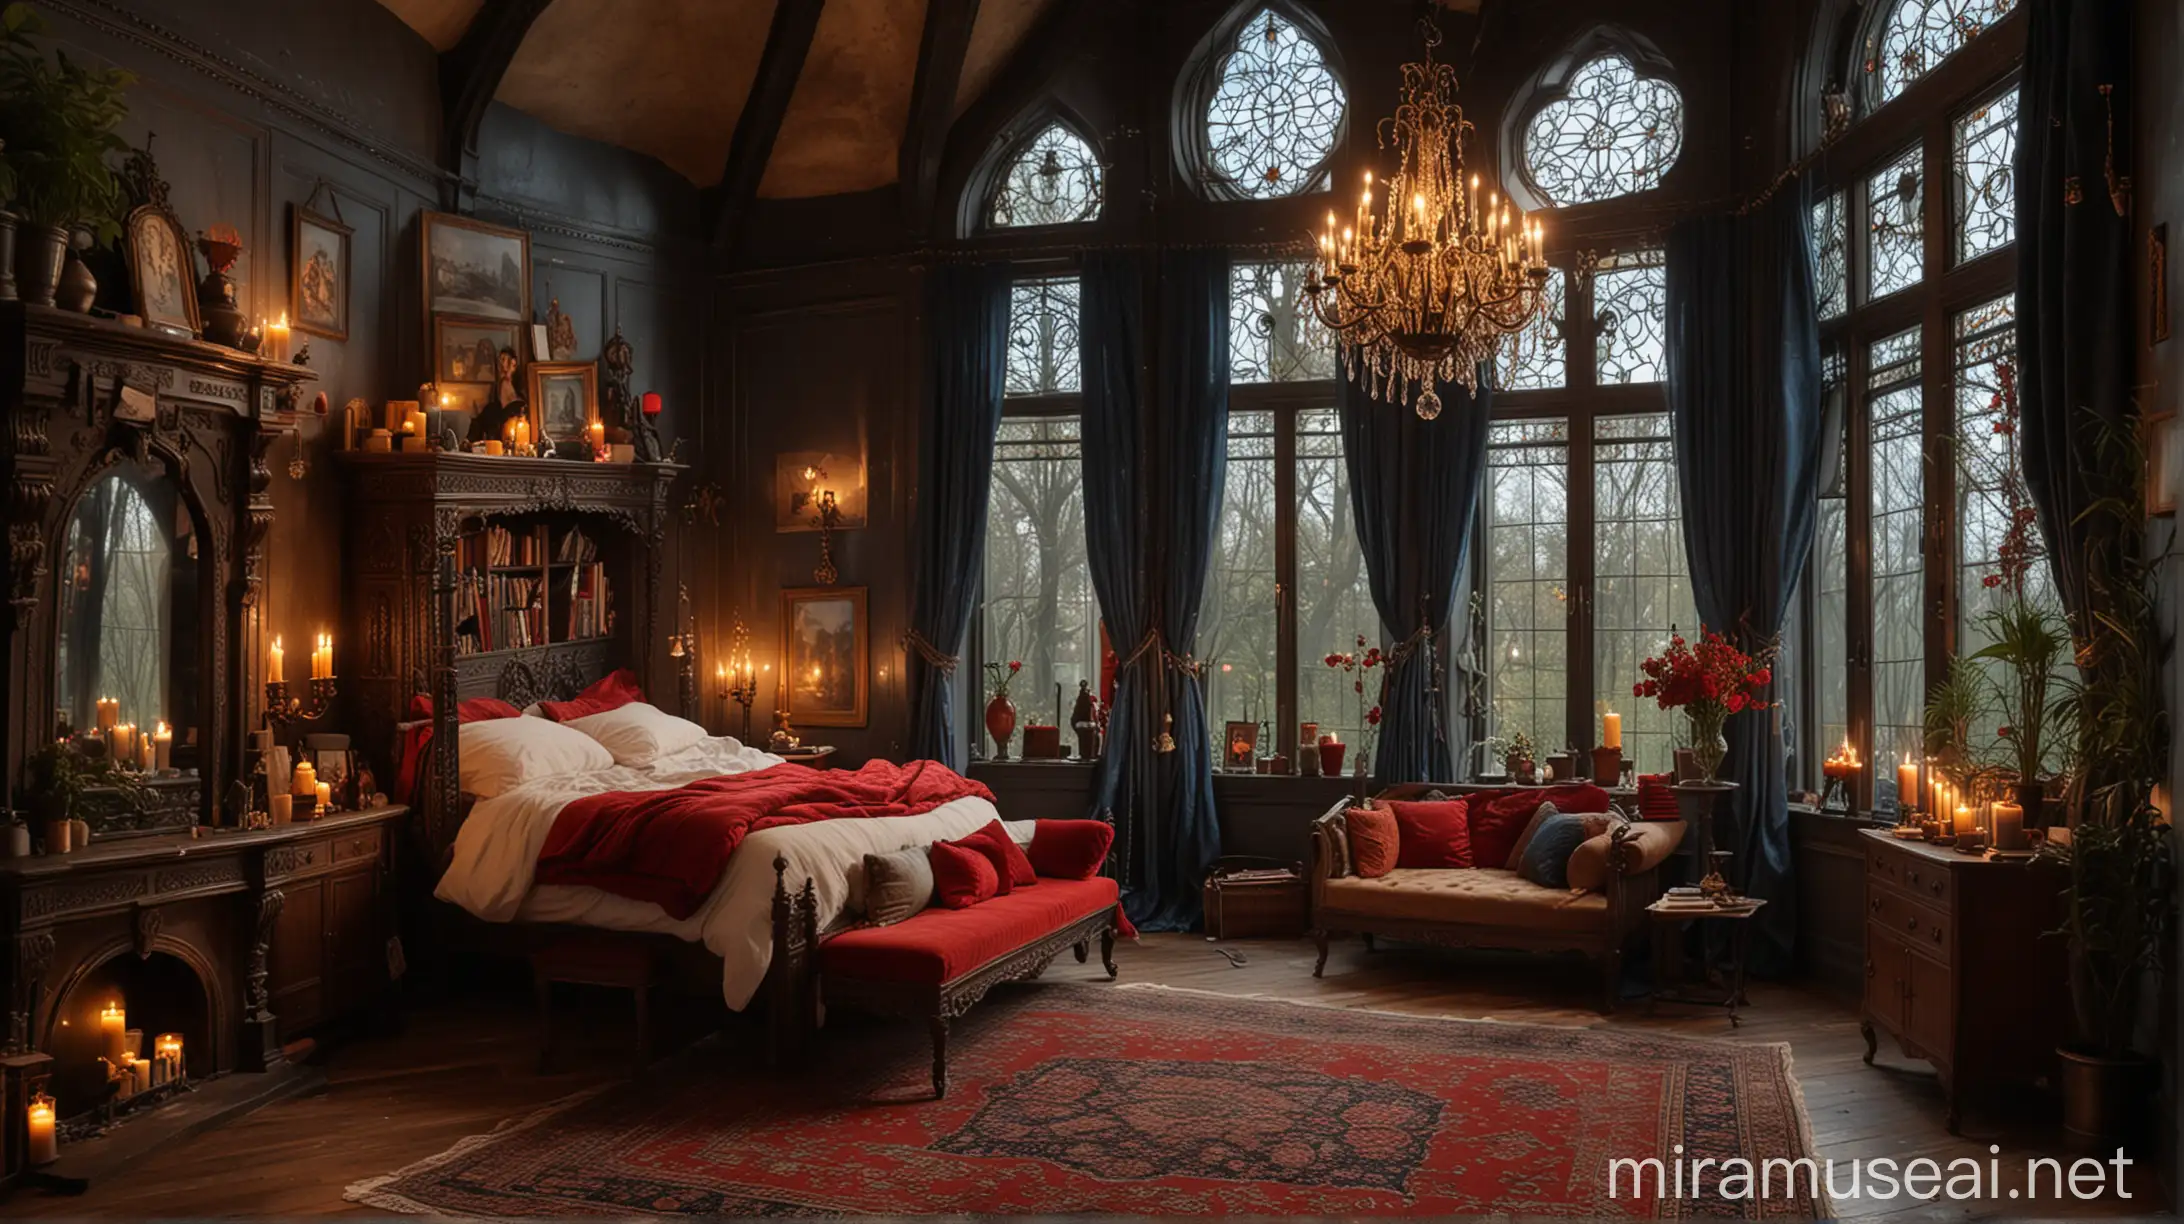 Luxurious Gothic Bedroom with Grand FourPoster Bed and Velvet Drapes